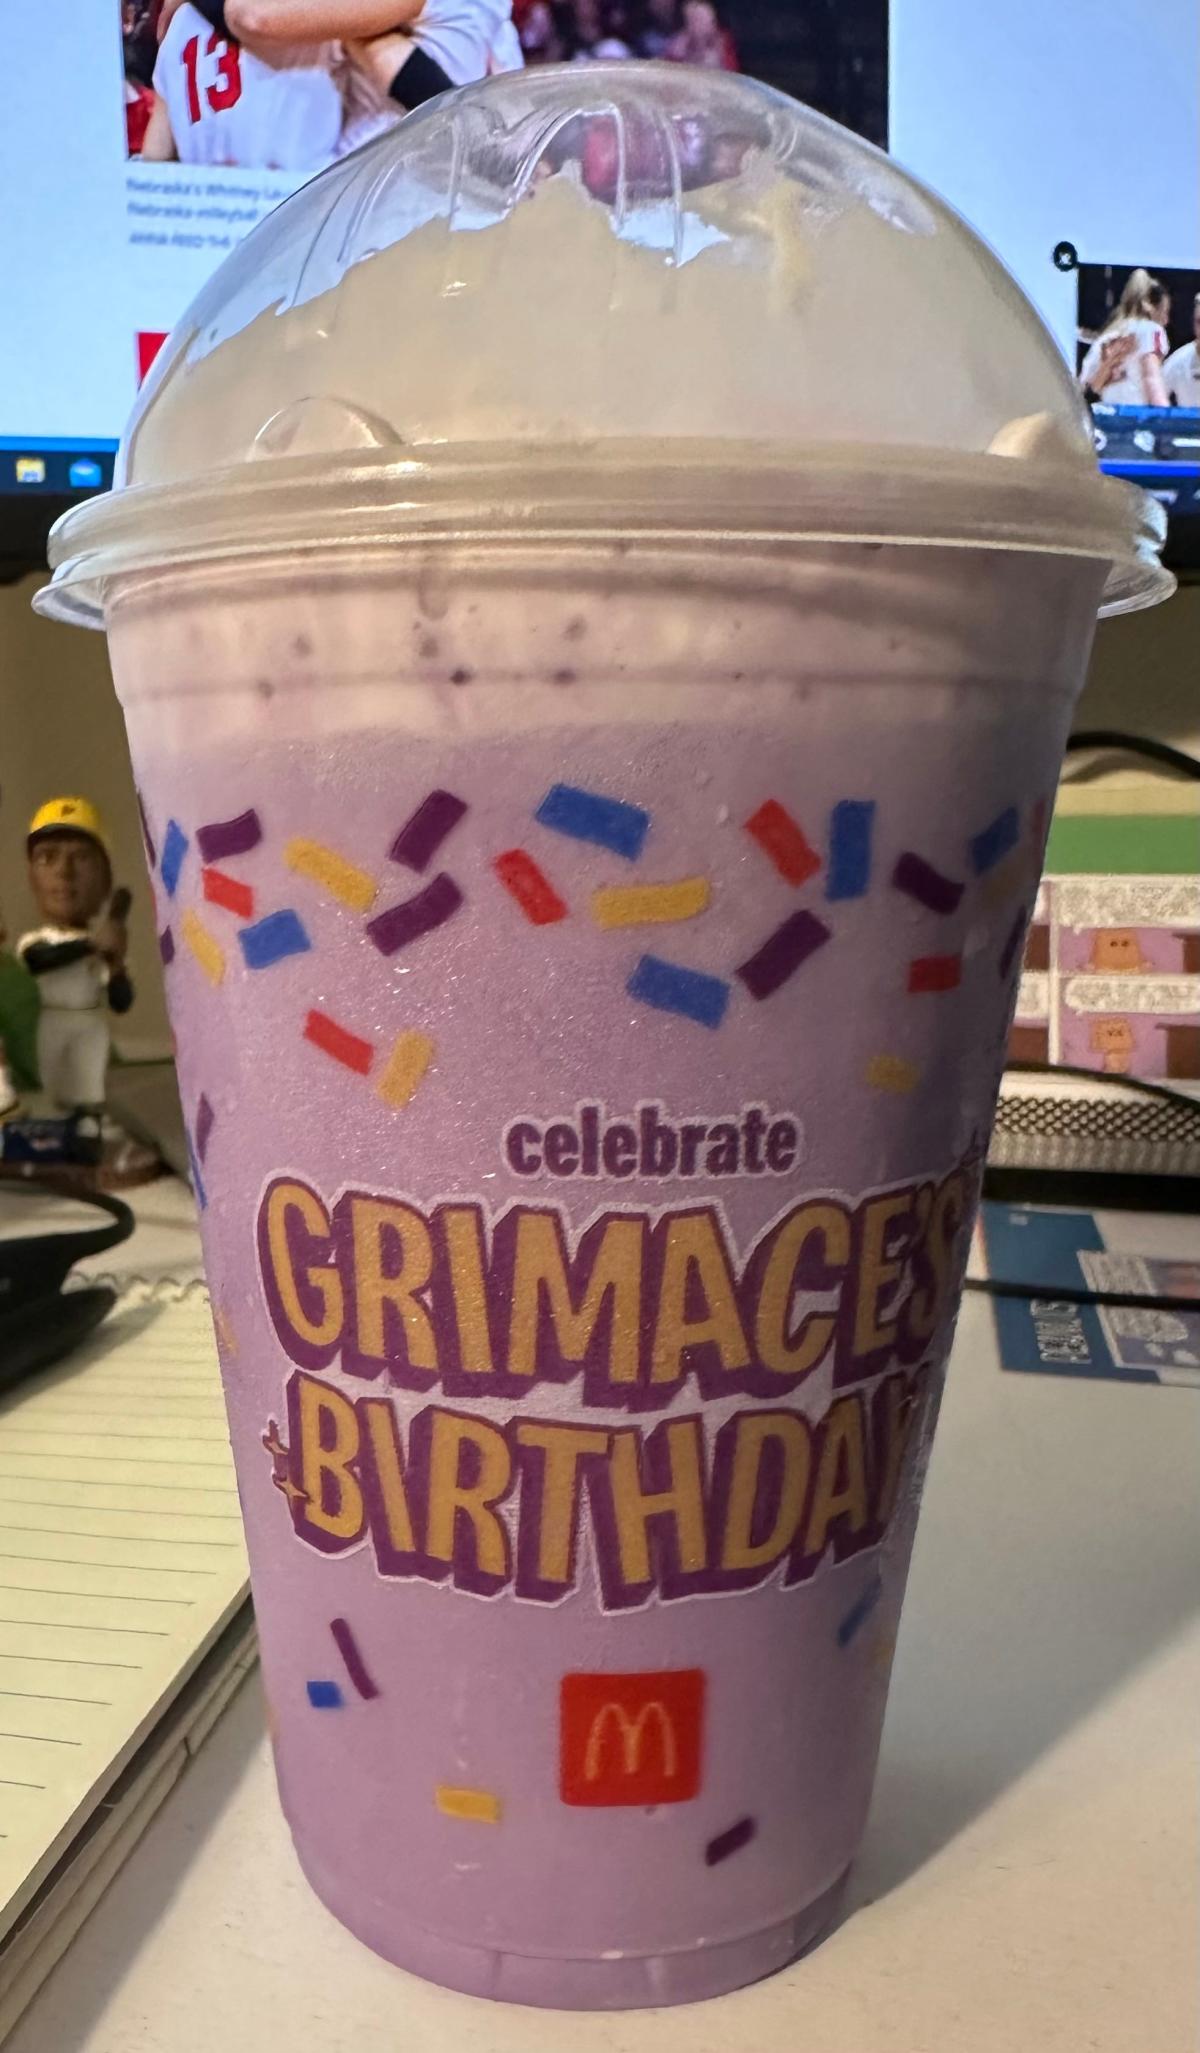 Mcdonalds Grimace Birthday Shake Has A Mysterious Flavor But We May Have Figured It Out 9866